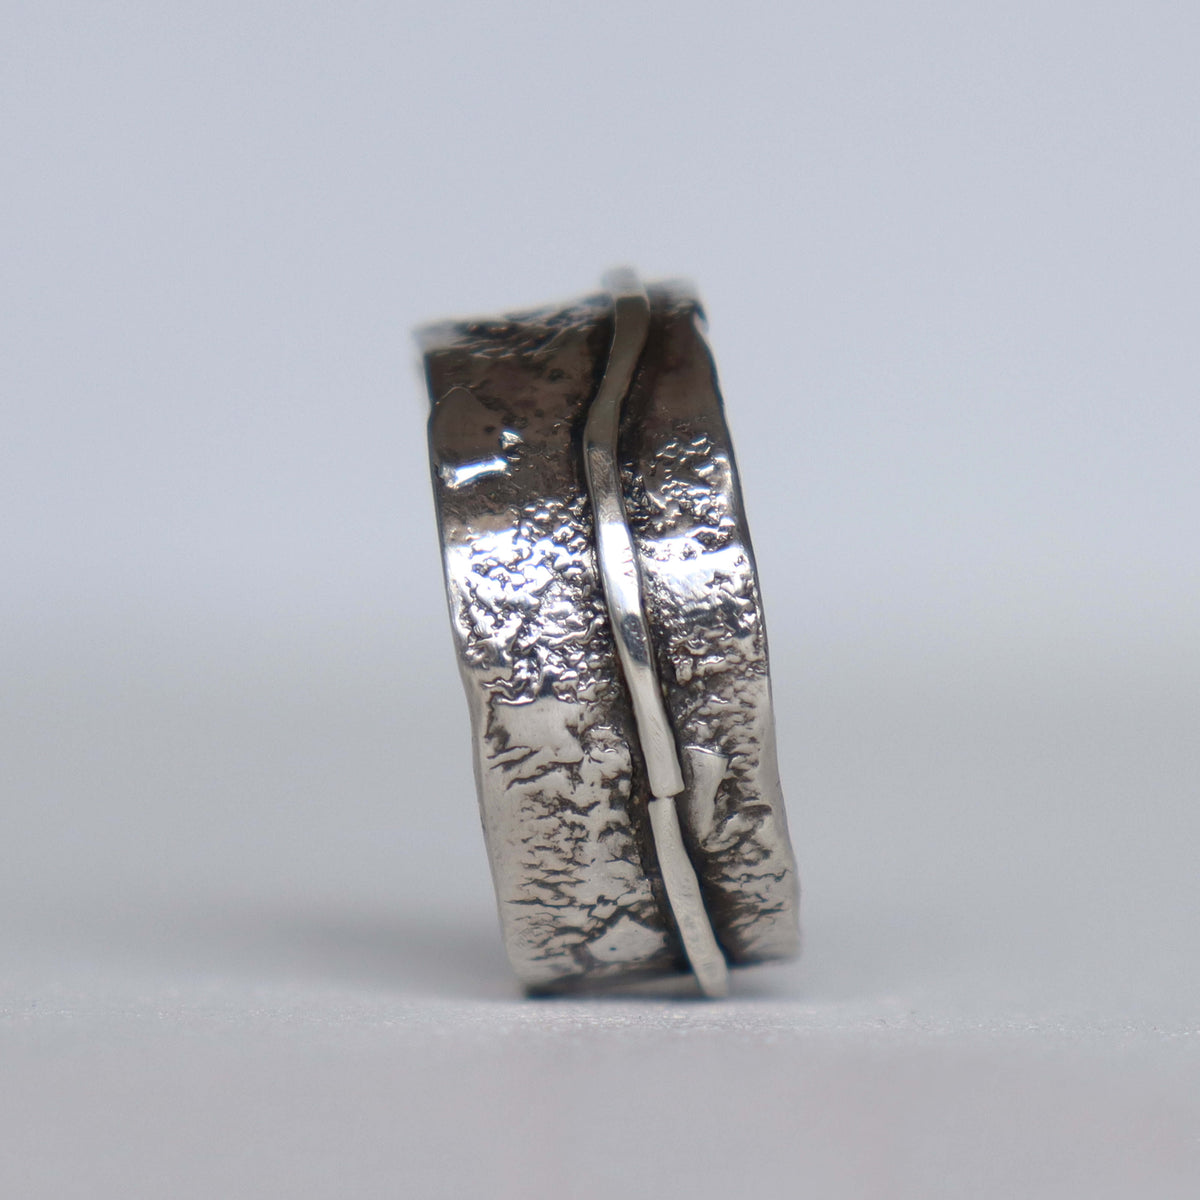 Organic silver ring for boyfriend or husband, sterling silver 925 ring,handmade by roff jewellery